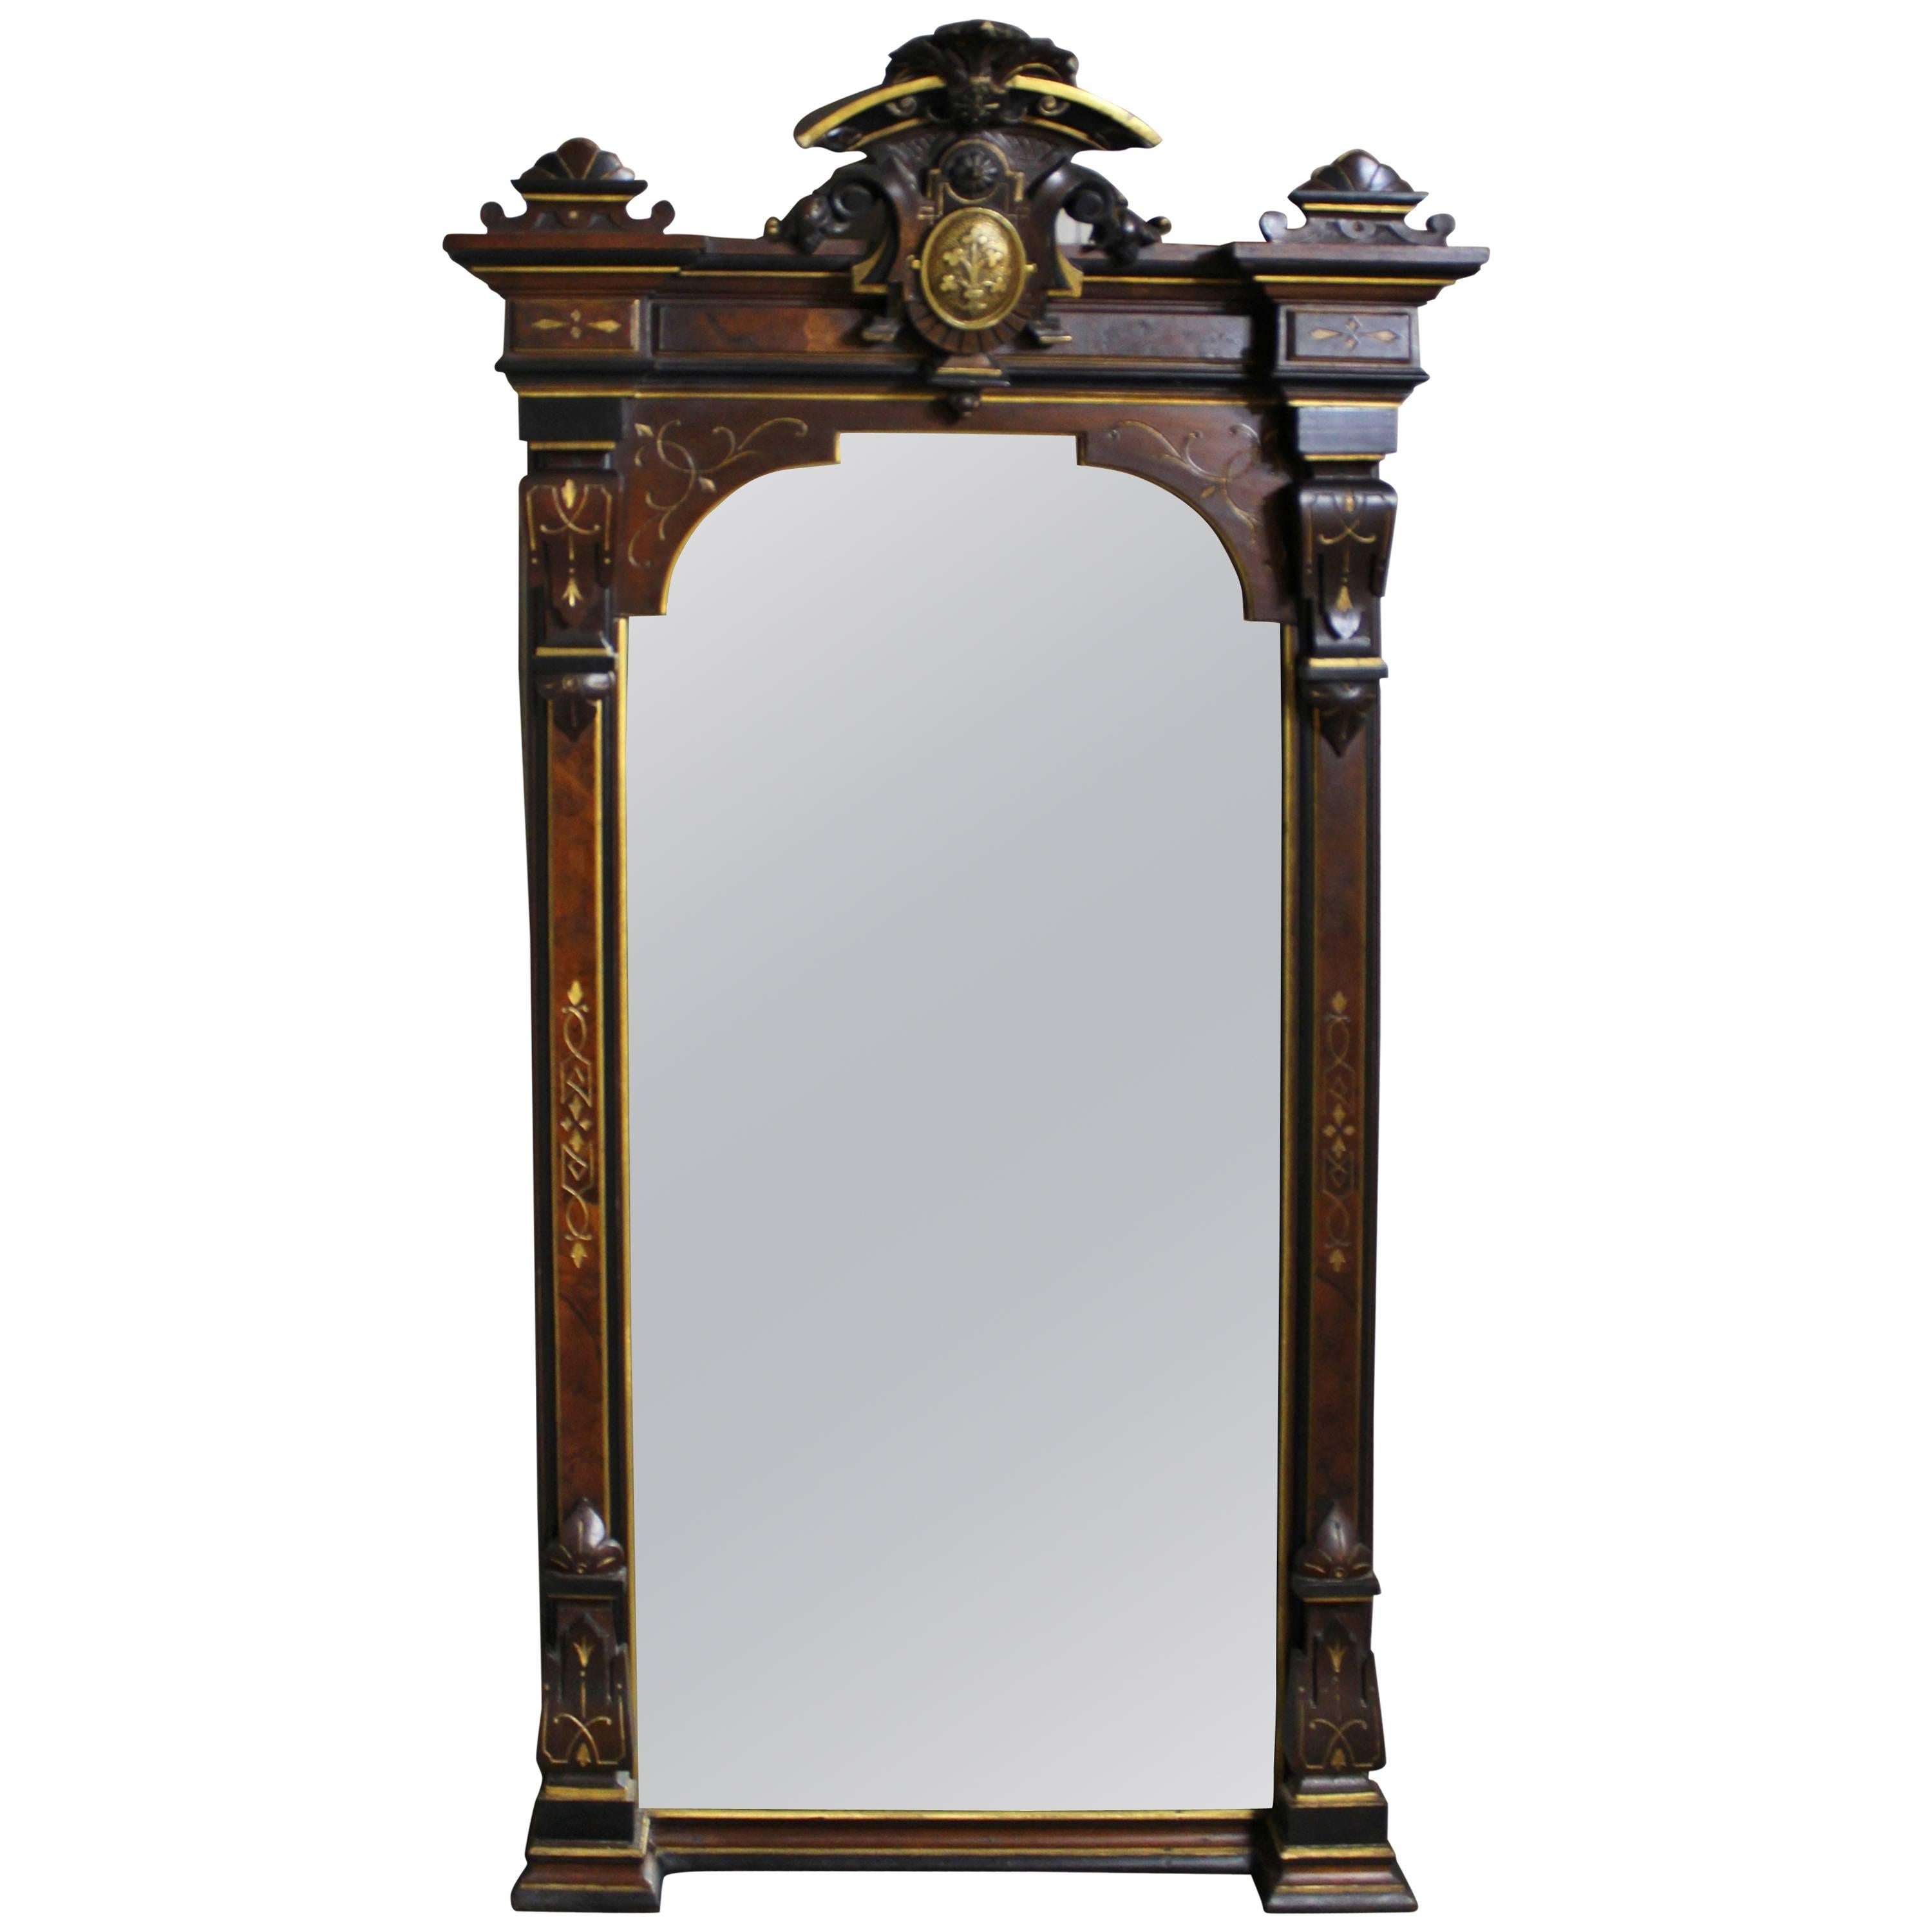 Renaissance Revival Mirror in the Manner of Herter Brothers